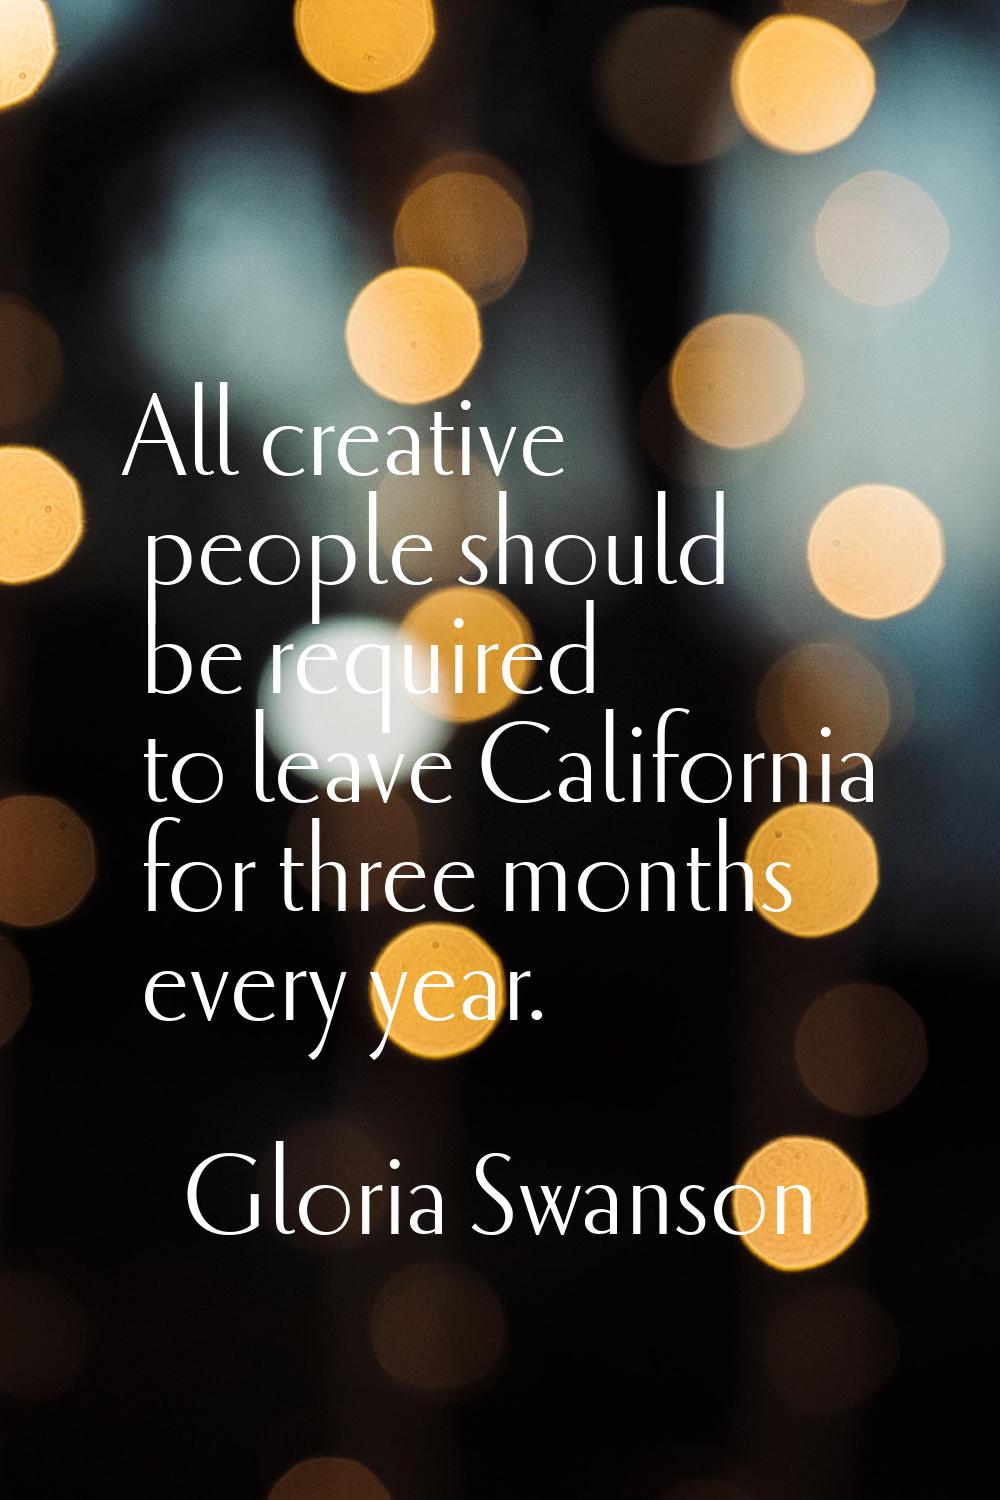 All creative people should be required to leave California for three months every year.